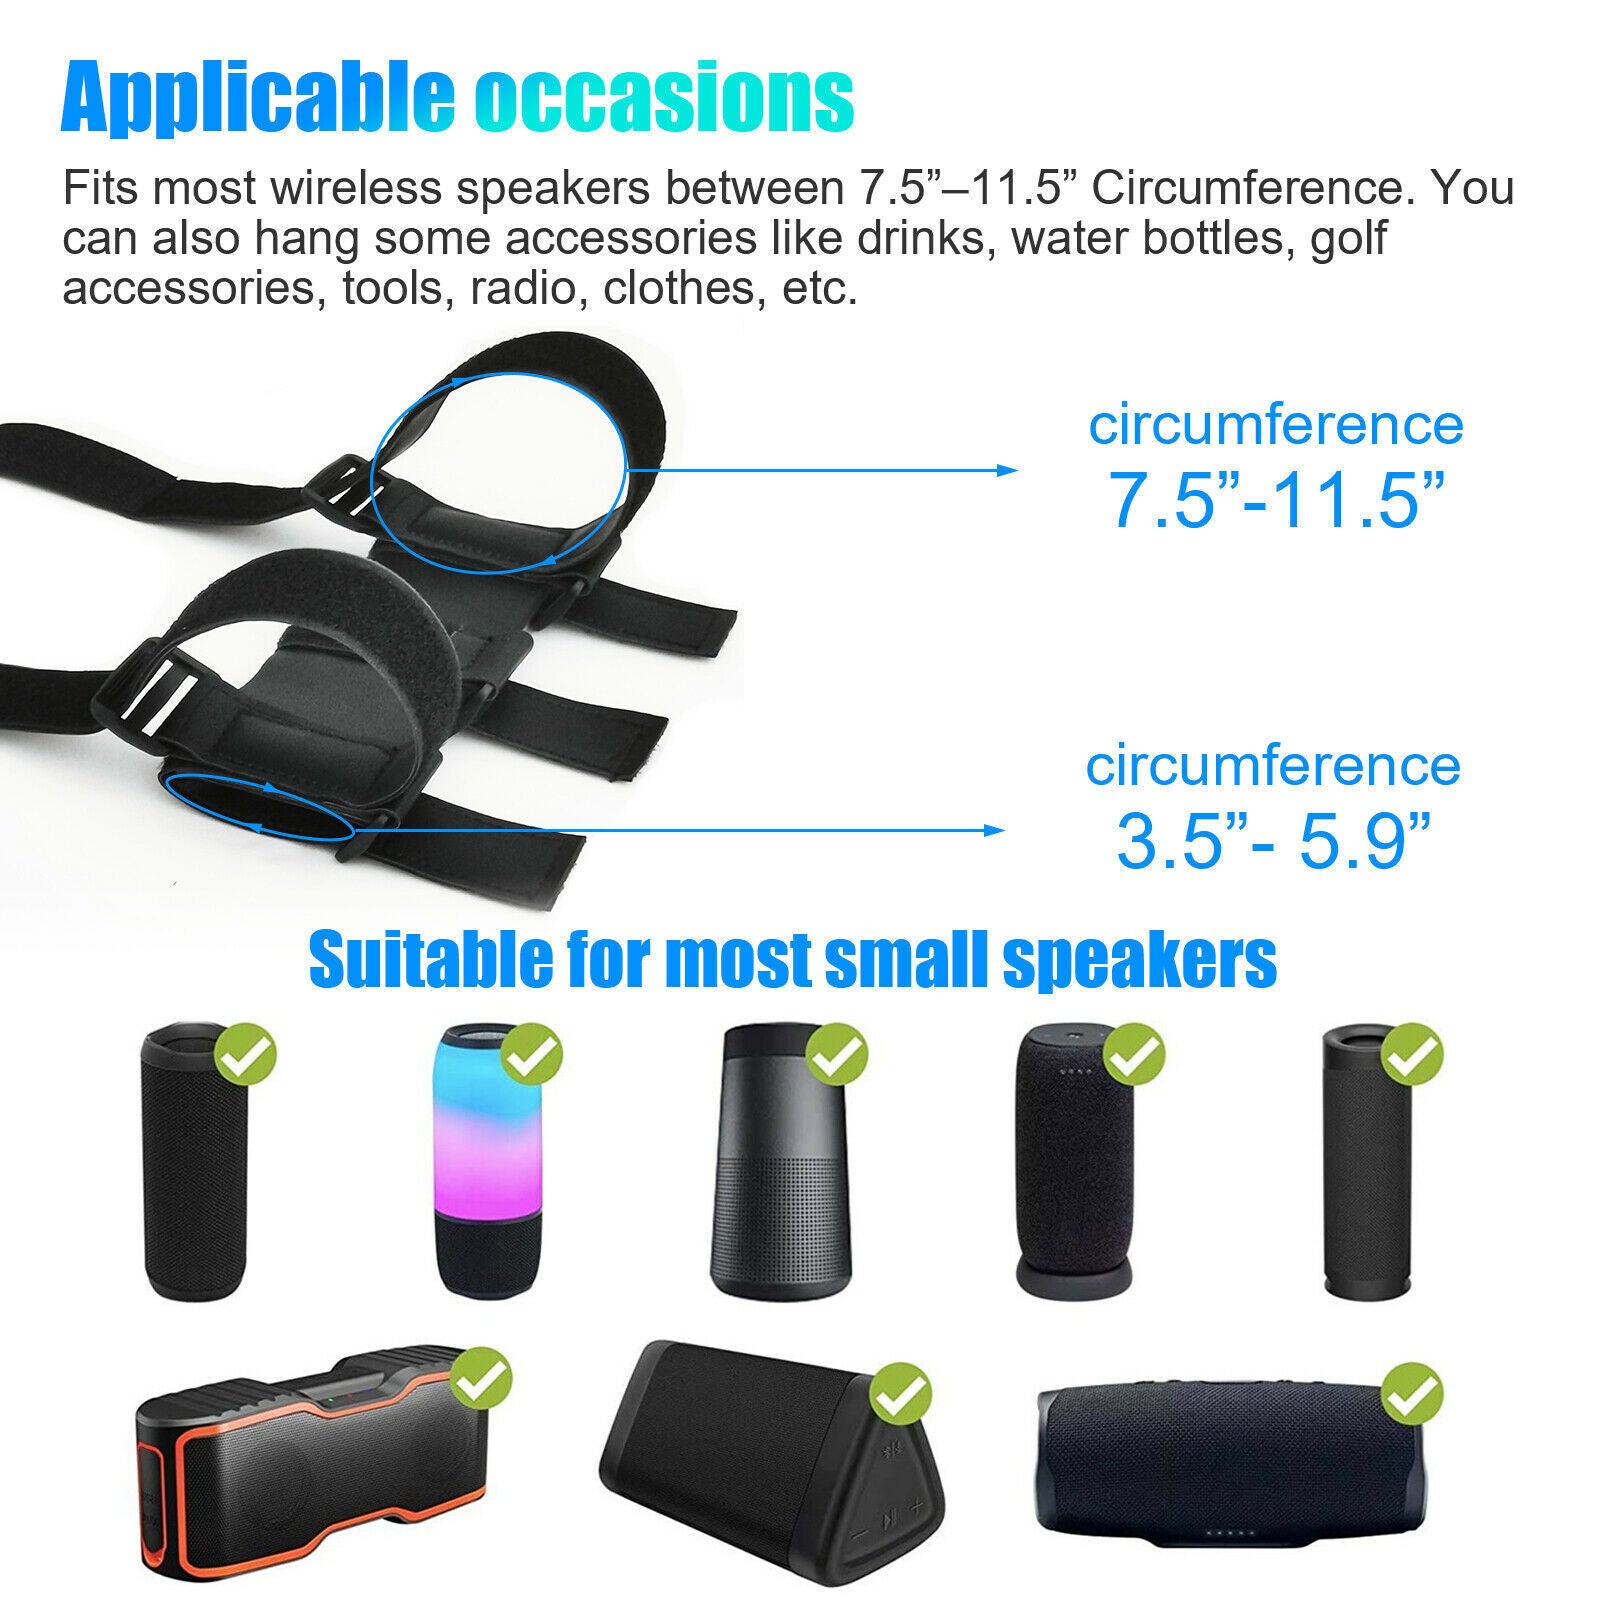 Bluetooth Speaker Mount Bike Adjustable Strap Accessories For Golf Cart Bicycle